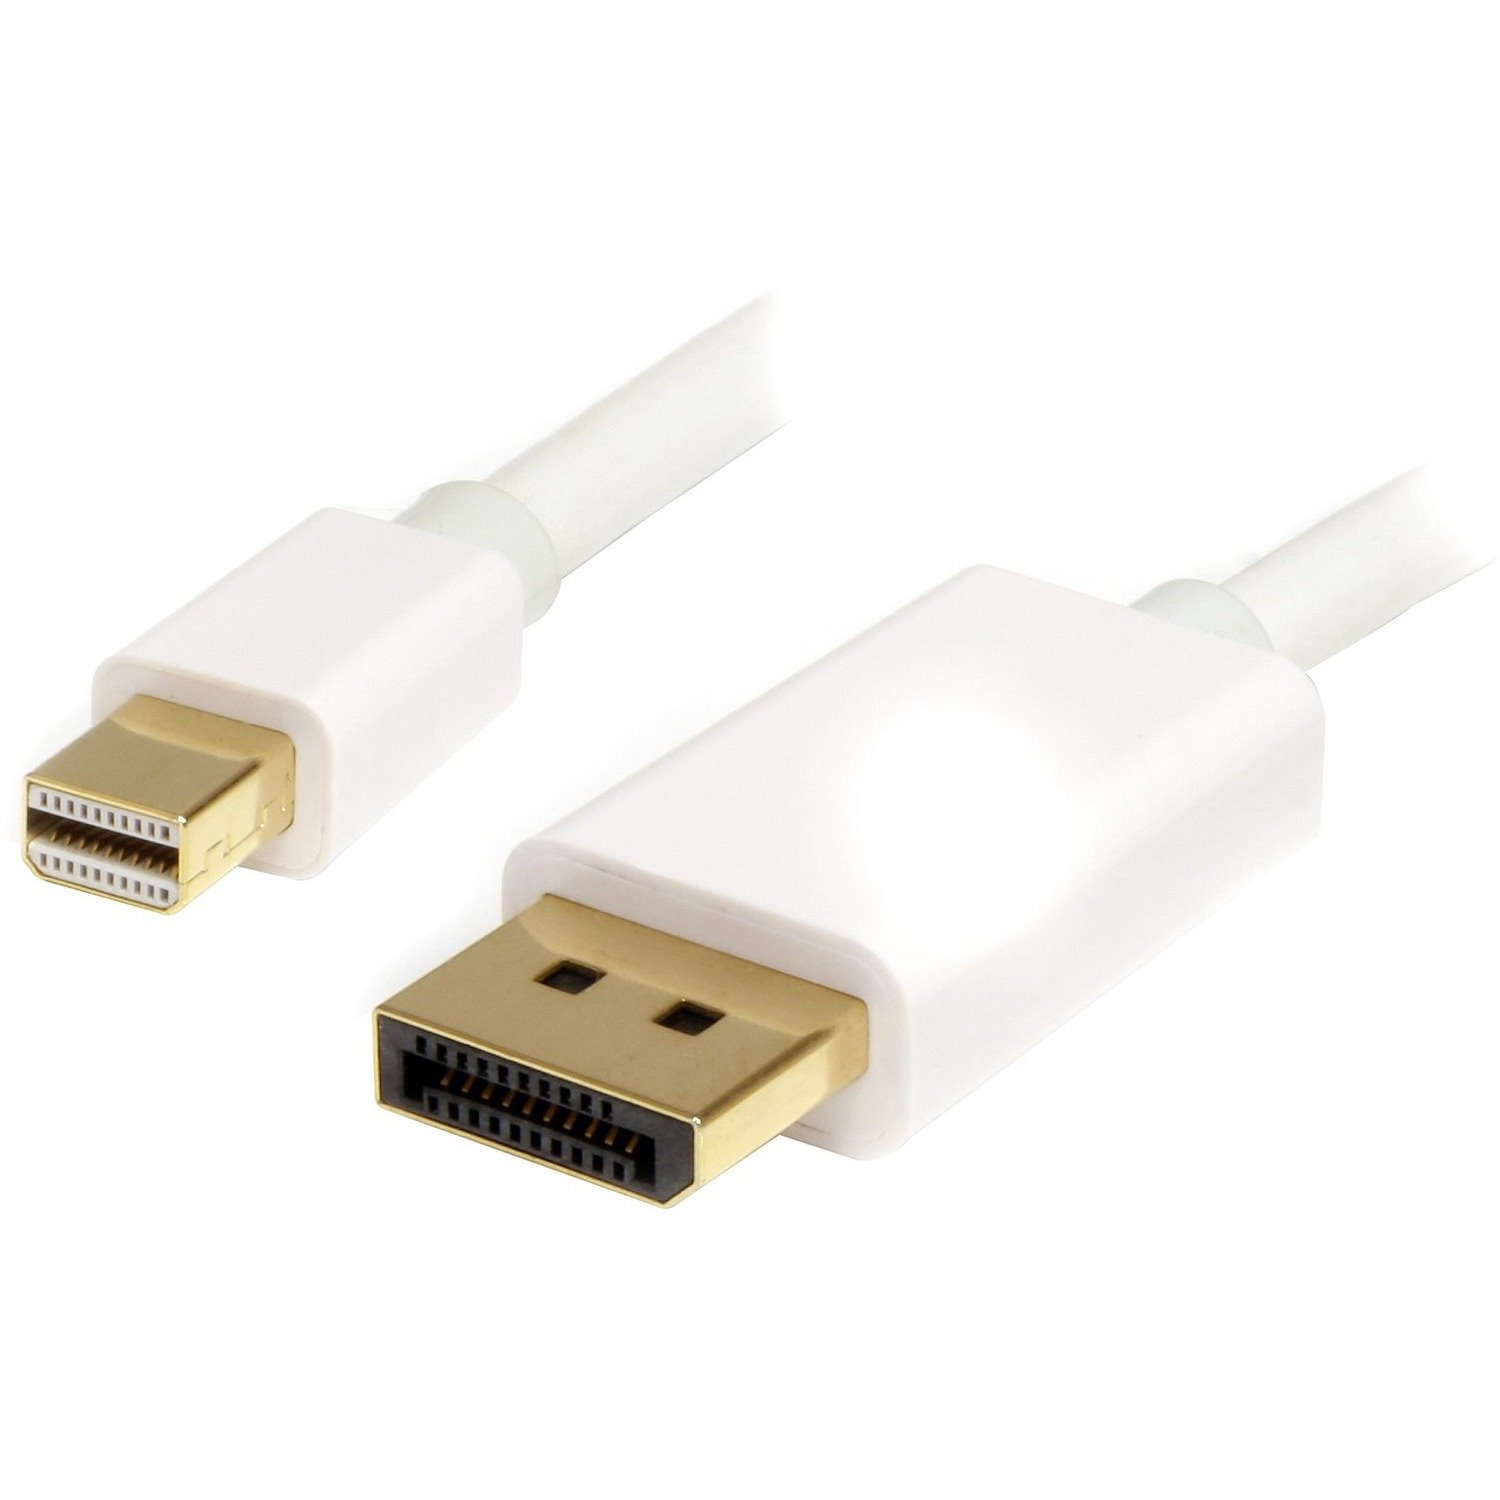 StarTech.com 3m (10ft) Mini DisplayPort to DisplayPort 1.2 Cable, 4K x 2K mDP to DisplayPort Adapter Cable, Mini DP to DP Cable~